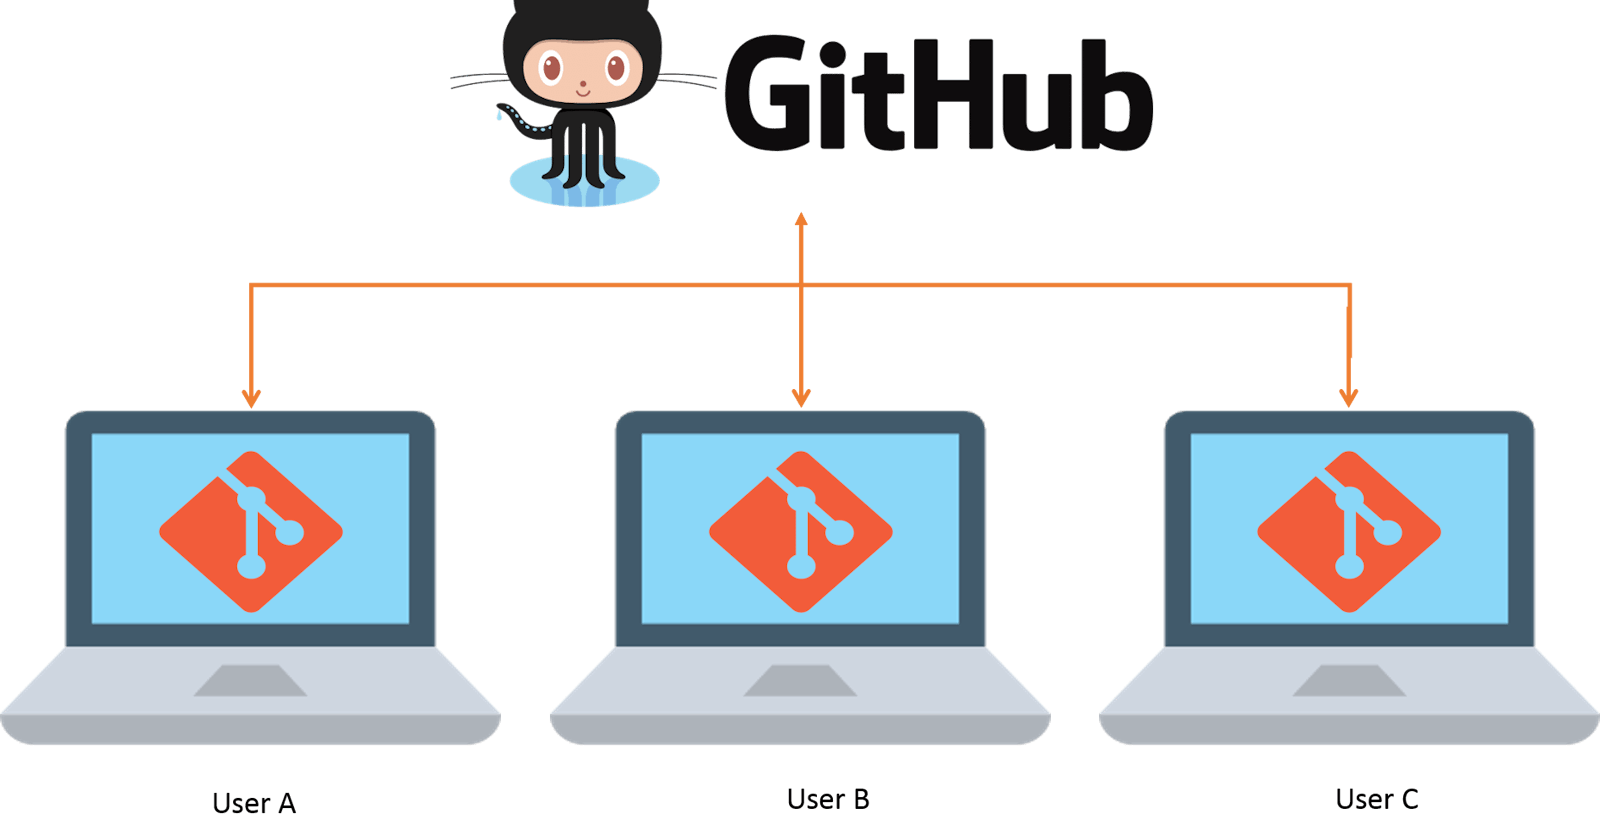 How to contribute using Git and GitHub